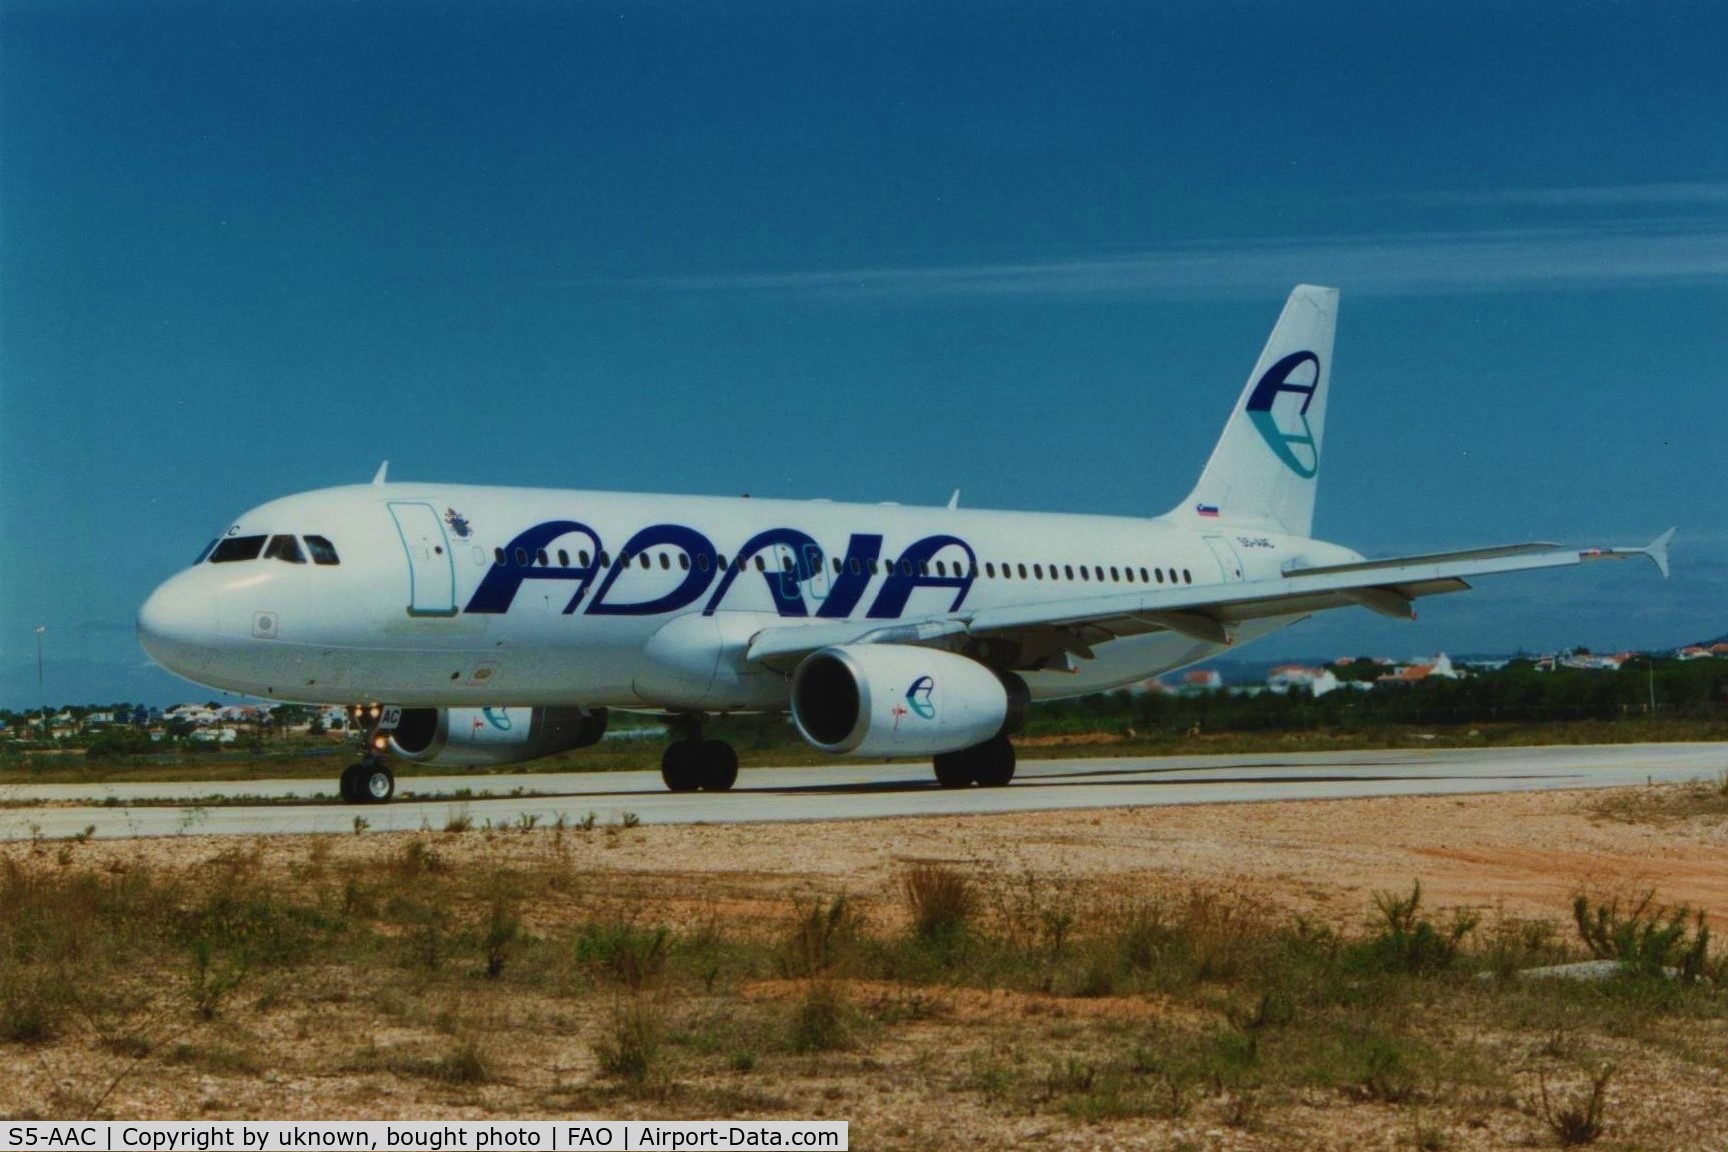 S5-AAC, 1990 Airbus A320-231 C/N 0114, photo from 2nd hand store.